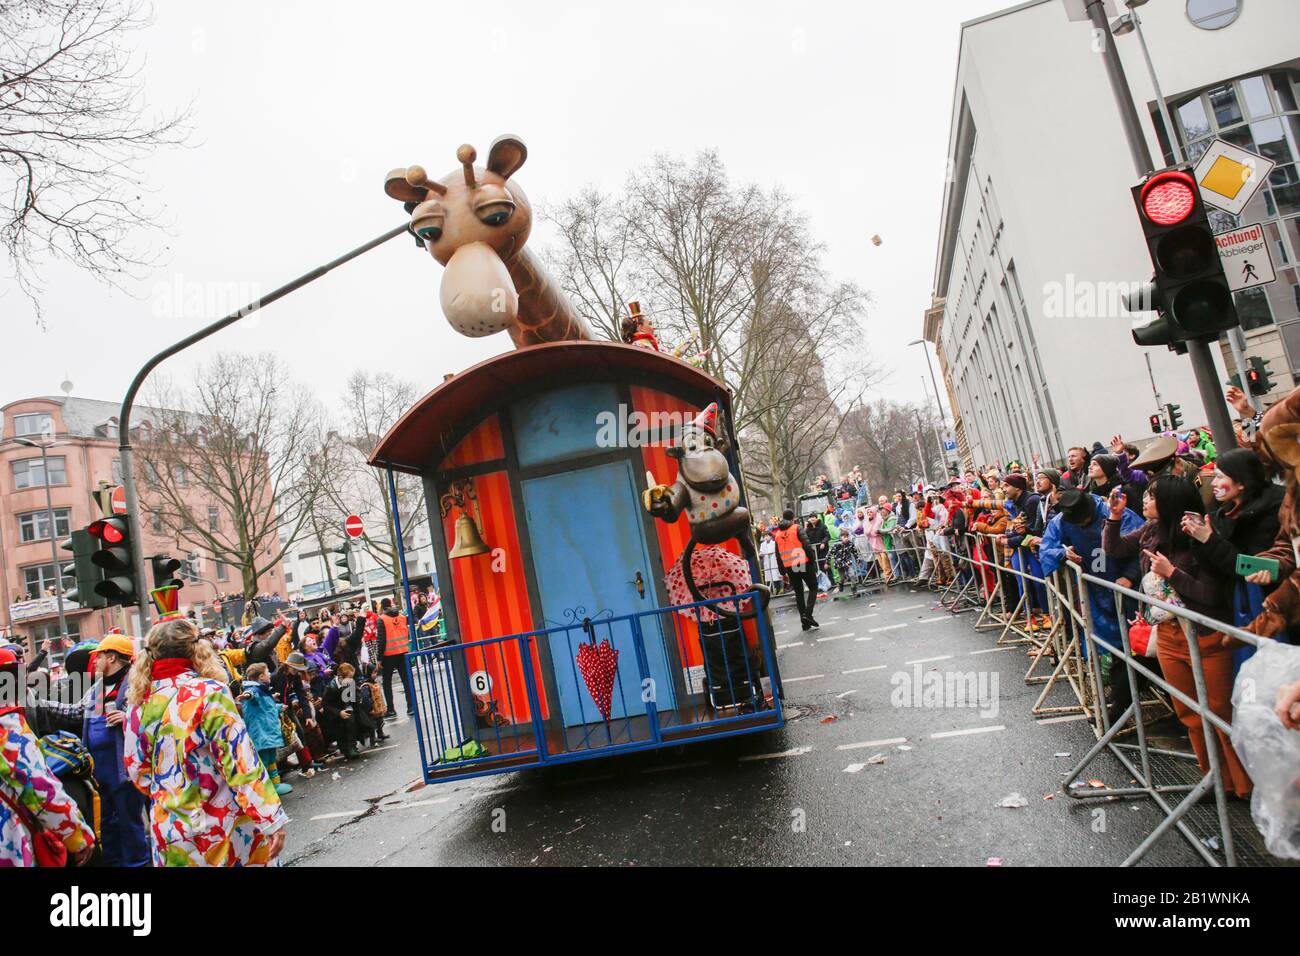 Mainz, Germany. 24th February 2020. A giraffe and a monkey are displayed on a float from the Carneval Club Mombach Die Eulenspiegel in the Mainz Rose Monday parade. Around half a million people lined the streets of Mainz for the traditional Rose Monday Carnival Parade. The 9 km long parade with over 9,000 participants is one of the three large Rose Monday Parades in Germany. Stock Photo